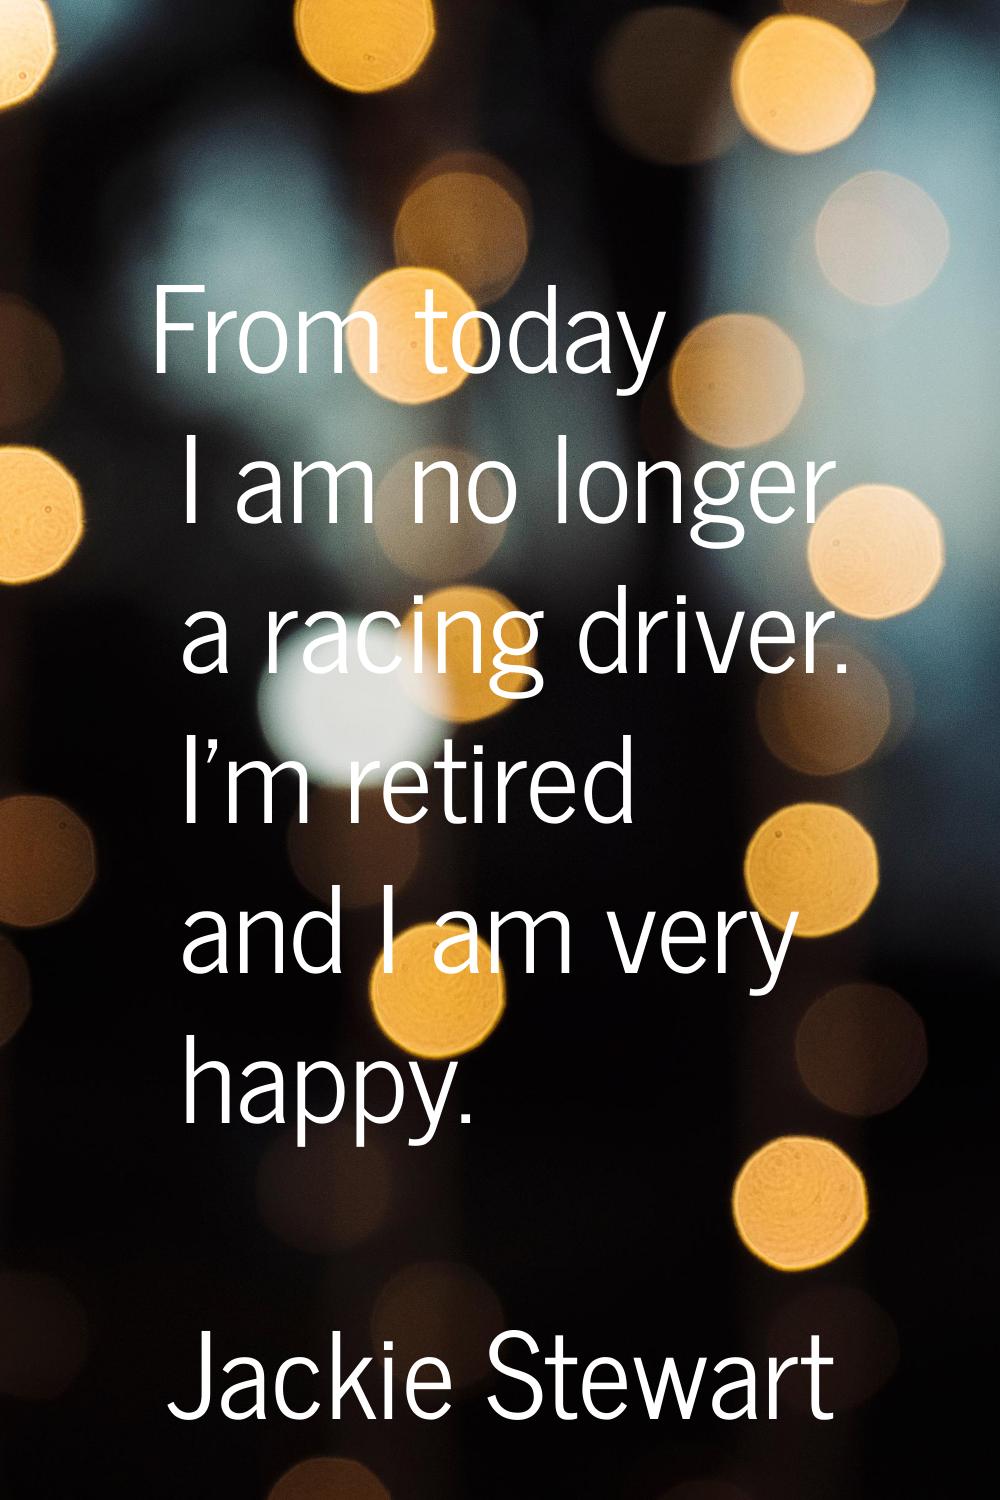 From today I am no longer a racing driver. I'm retired and I am very happy.